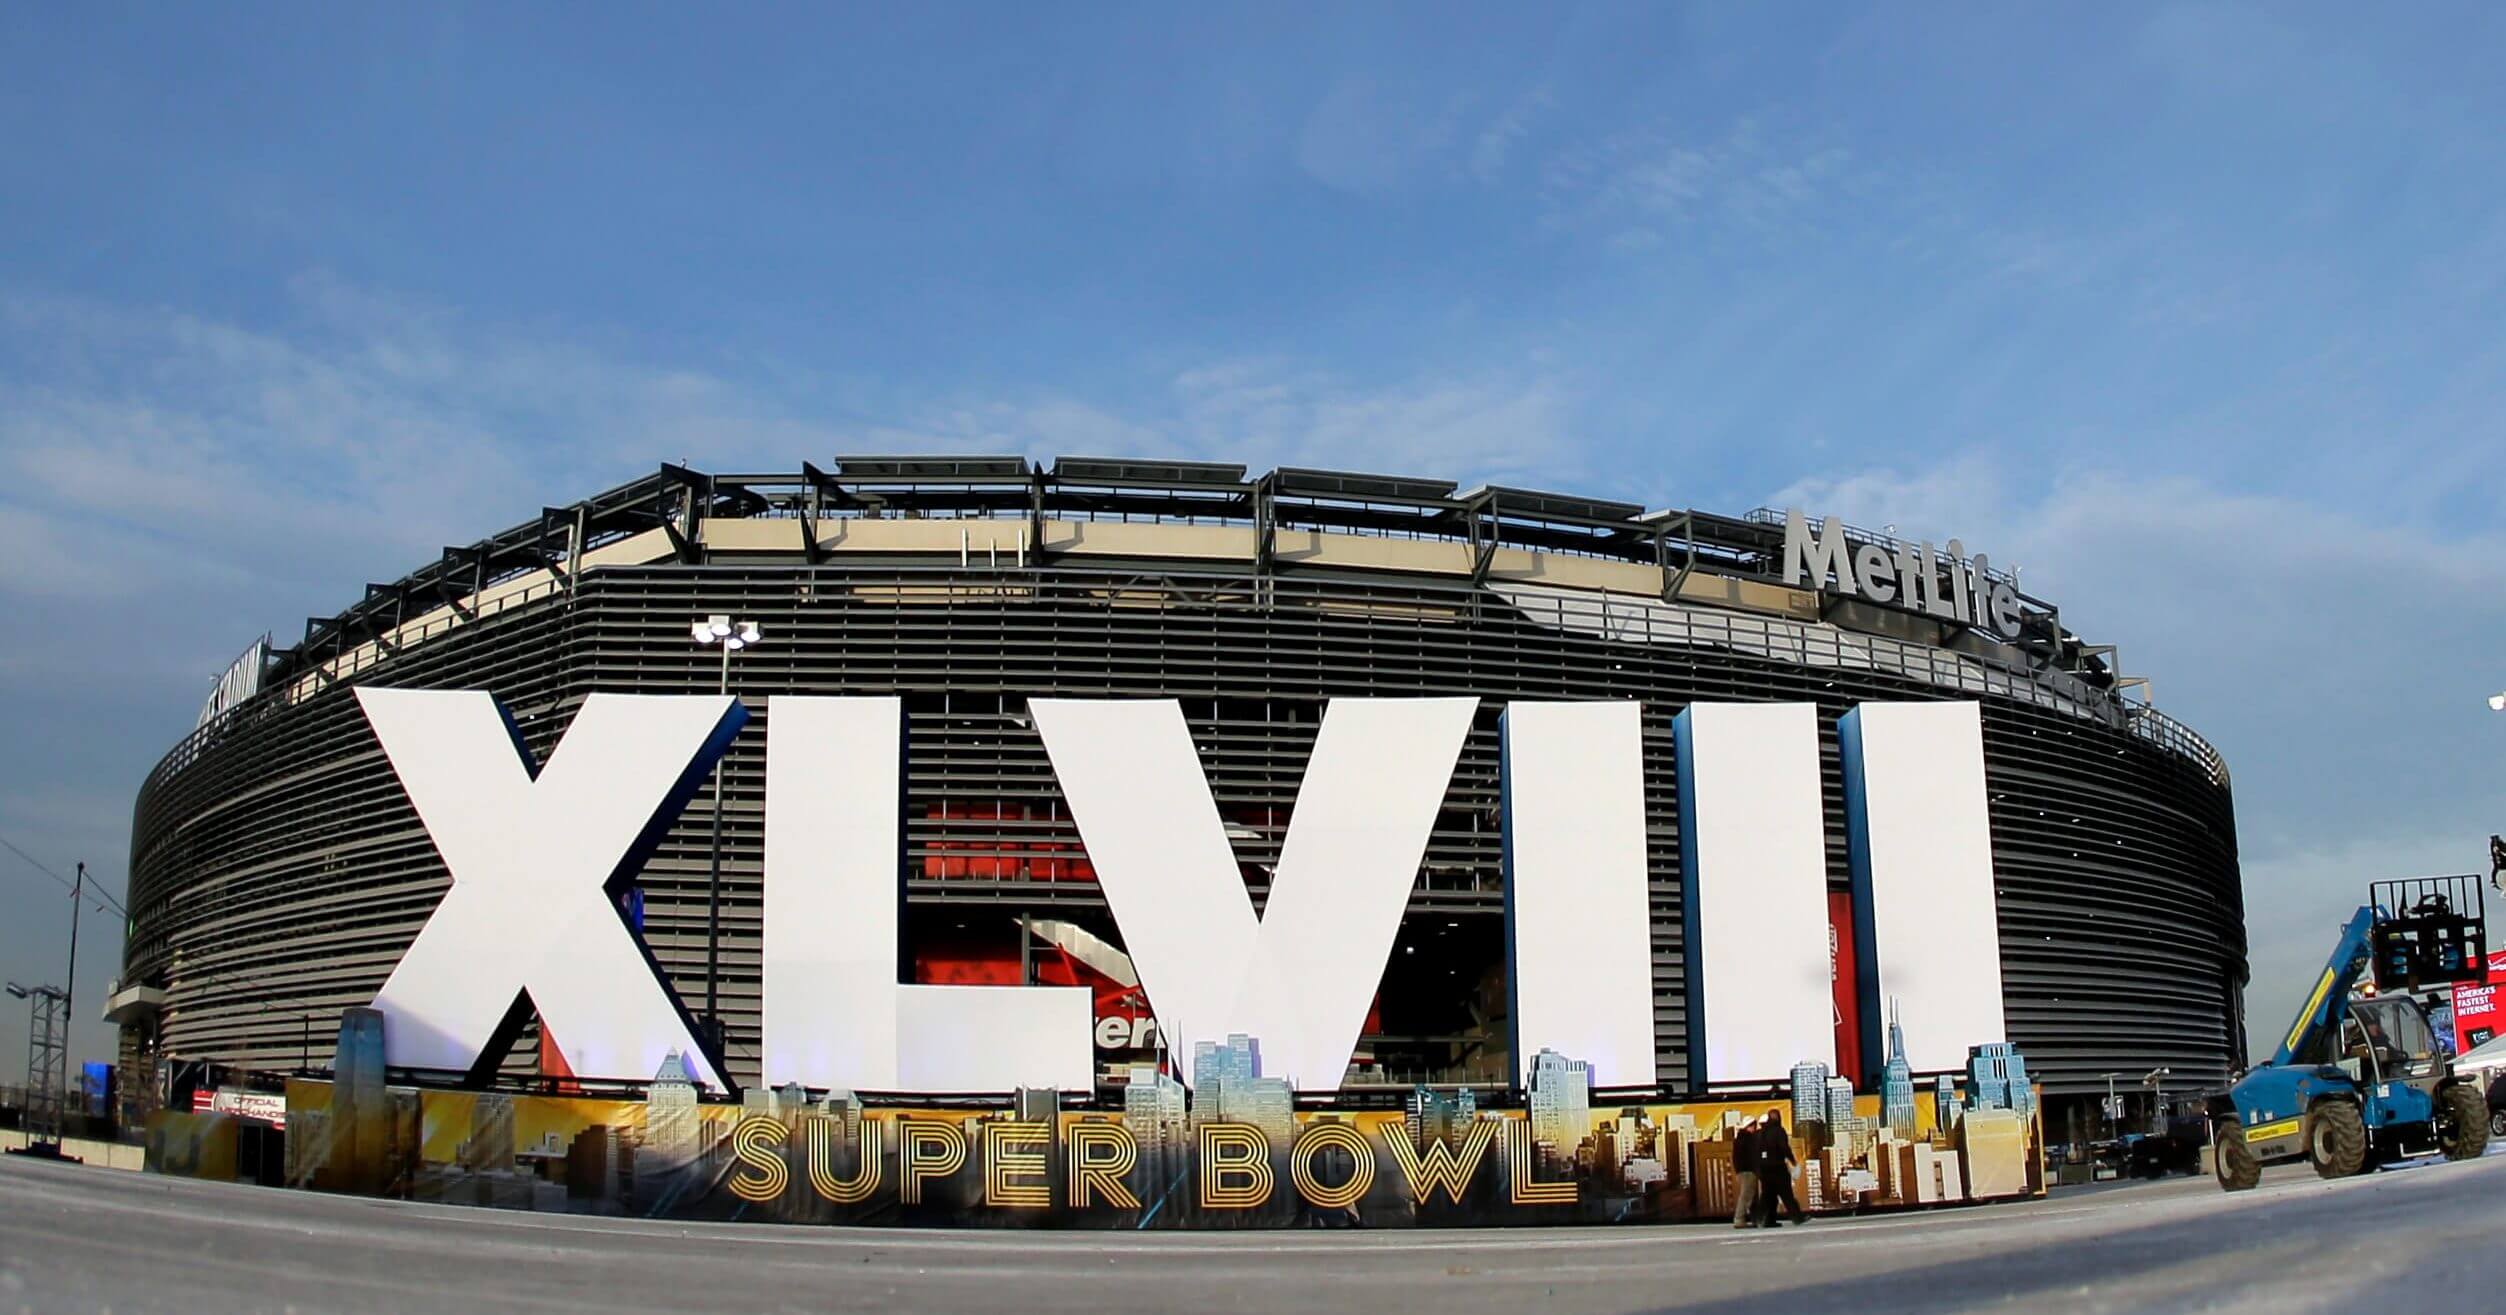 A sign for Super Bowl XLVIII stands in front of MetLife Stadium in East Rutherford, New Jersey, on Feb. 1, 2014.